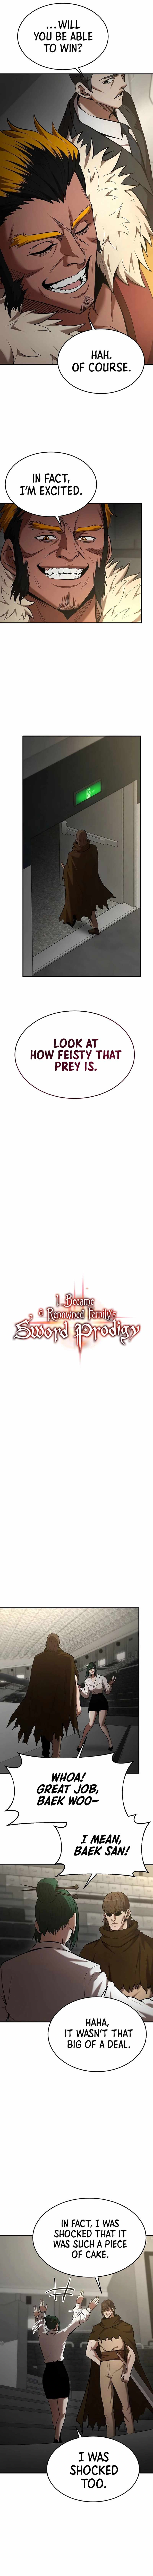 I Became a Renowned Family's Sword Prodigy Chapter 104 4